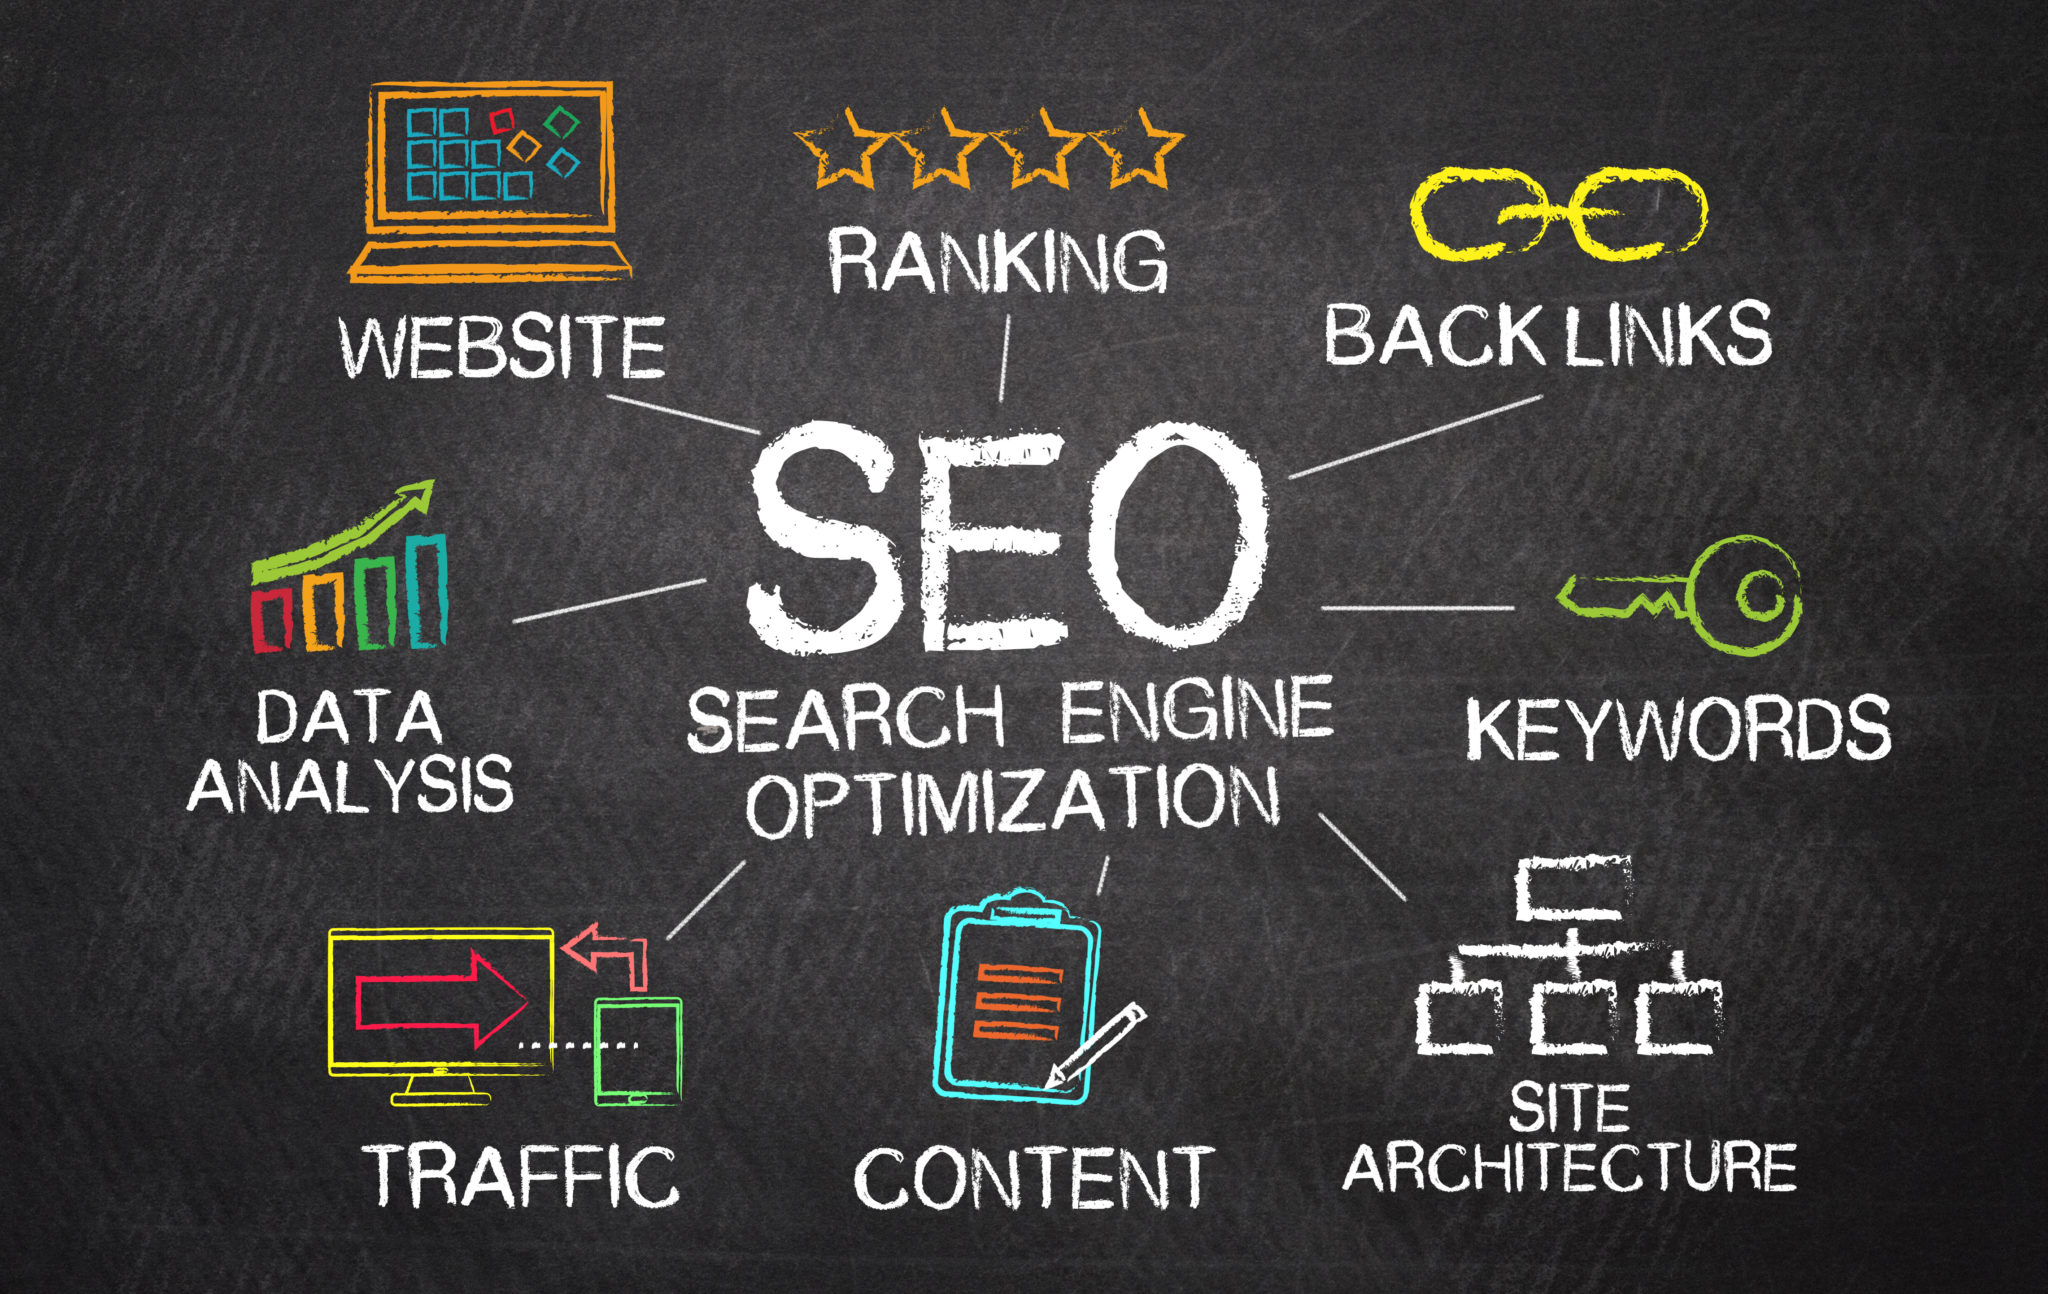 6 SEO Tips to Help Small Businesses Grow - The Zebra